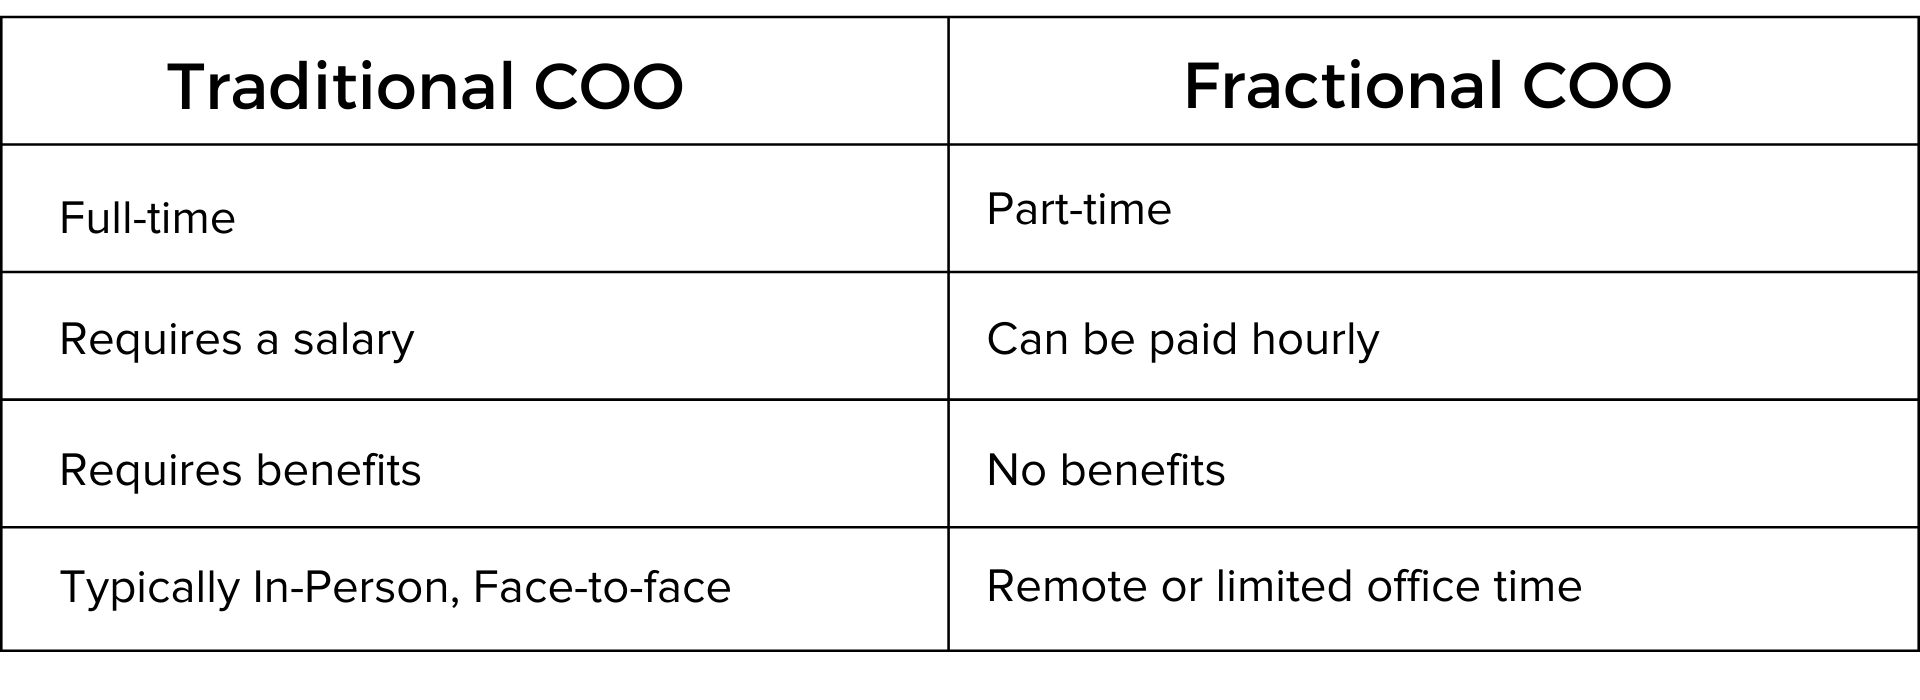 Fractional COO